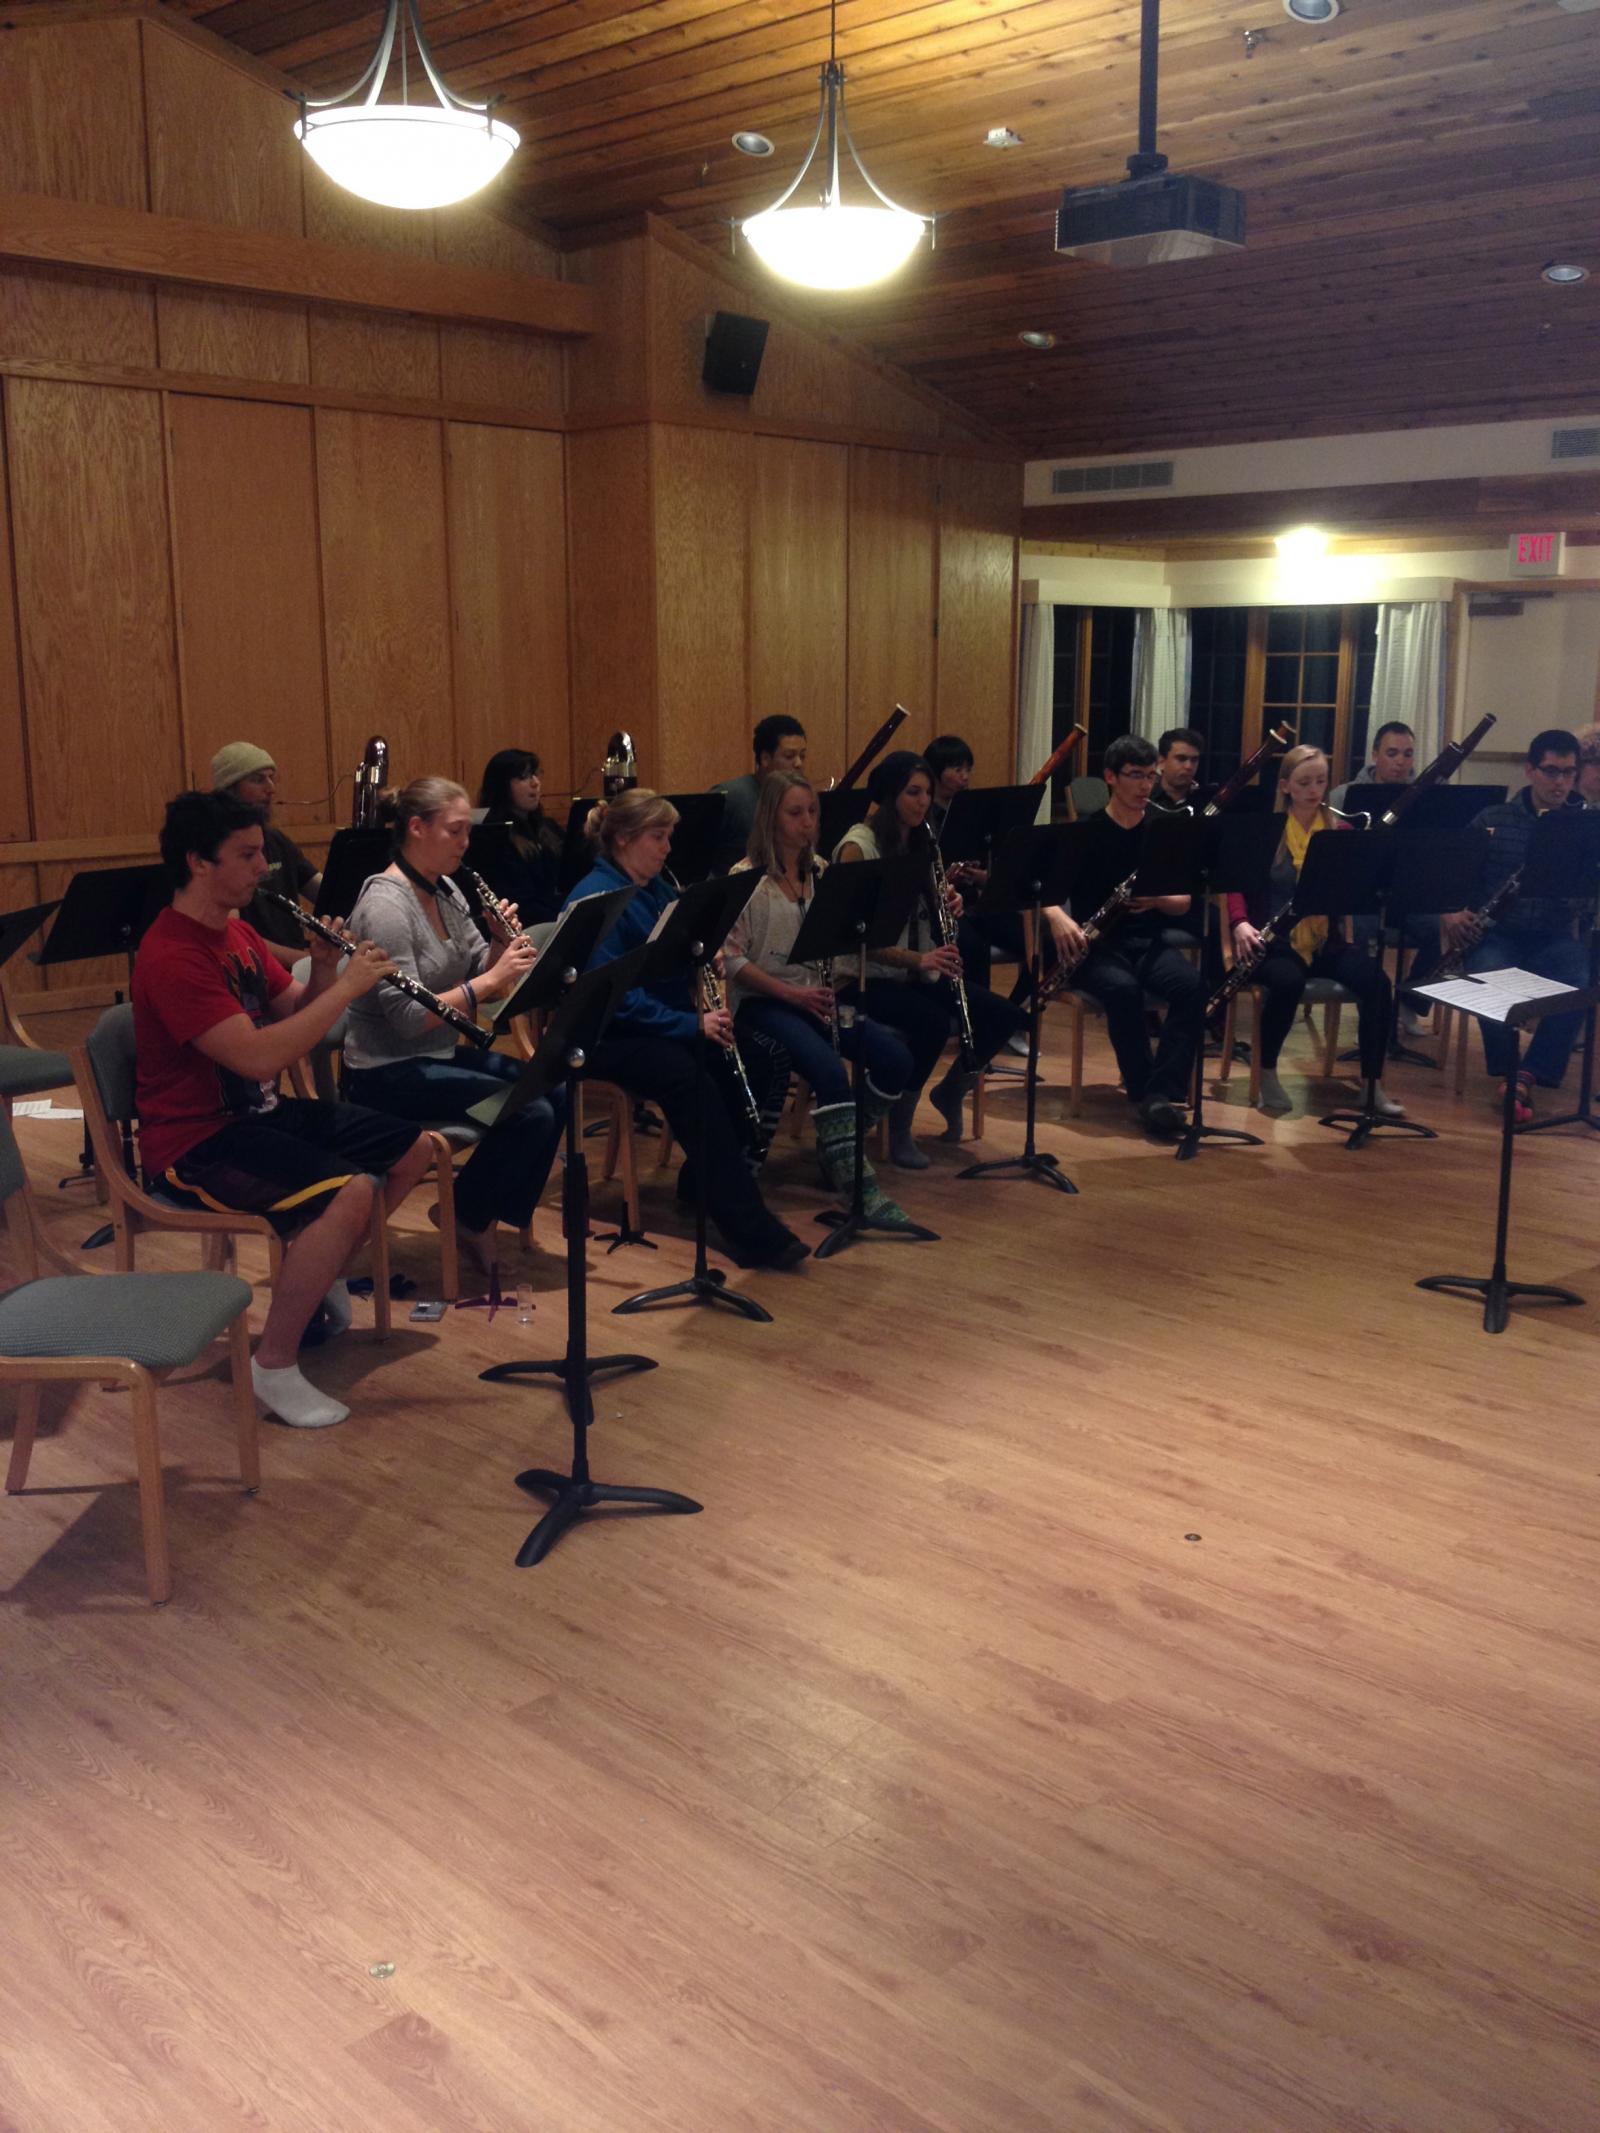 Oboe and bassoon students rehearsing together at Bjorklunden